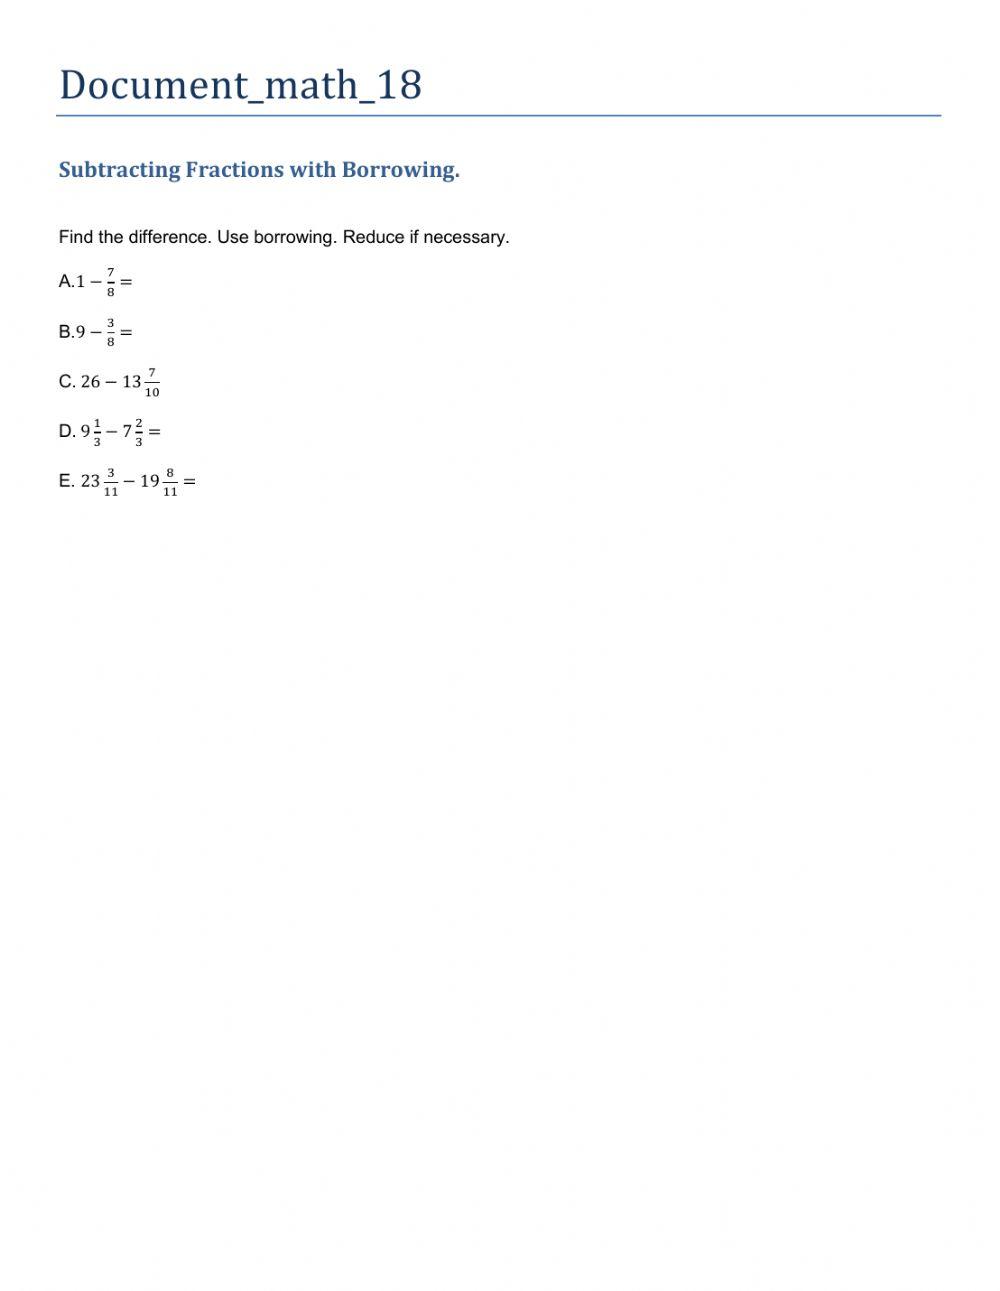 Subtracting with borrowing document-math-18